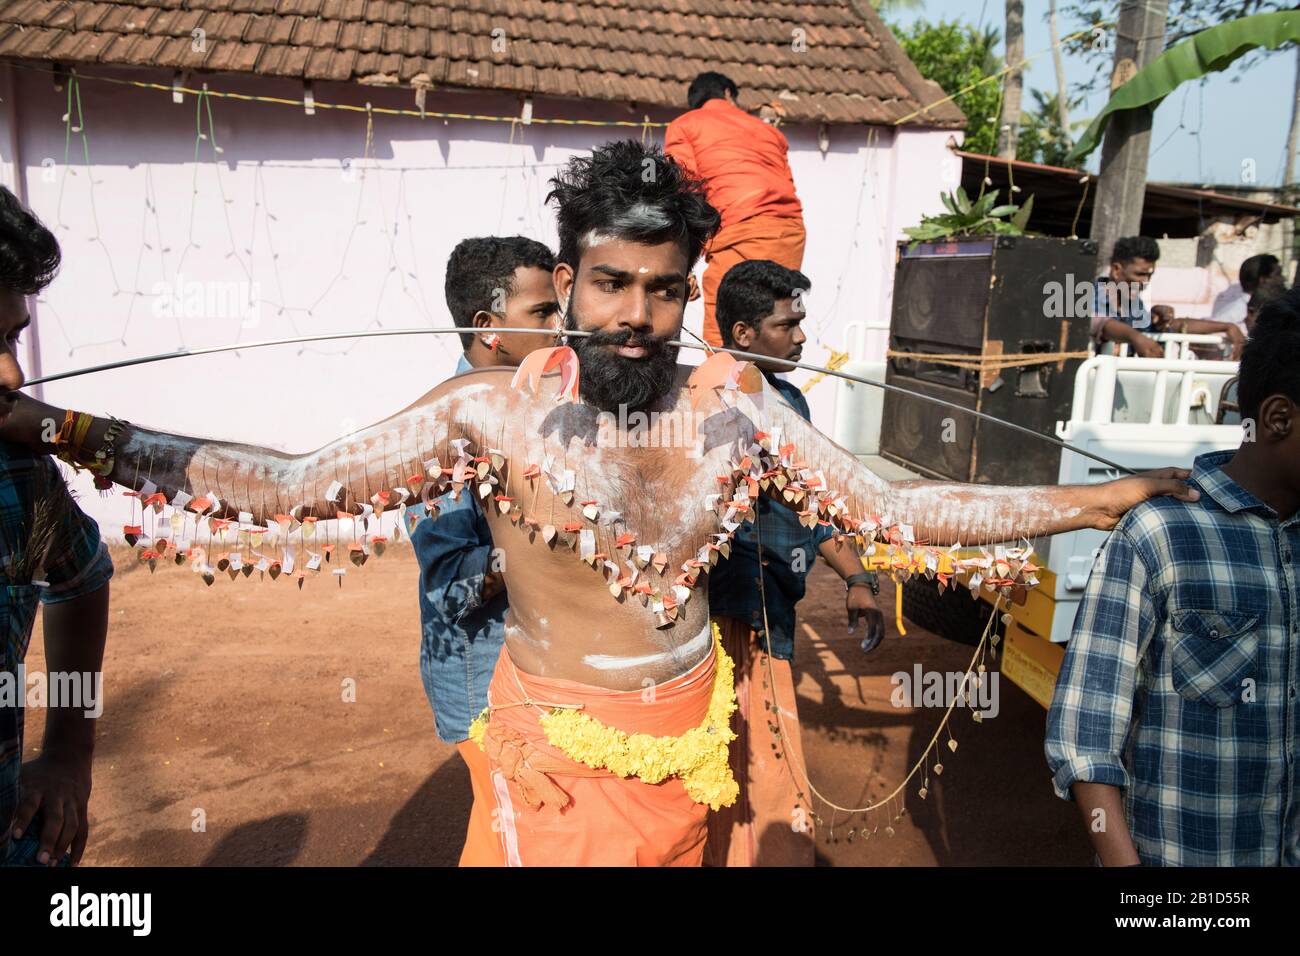 Devotees holding spears in their pierced mouths (Kavadi Aattam) as an act of devotion during Thaipooyam, or Thaipoosam, Festival in Kedakulam, Kerala. Stock Photo